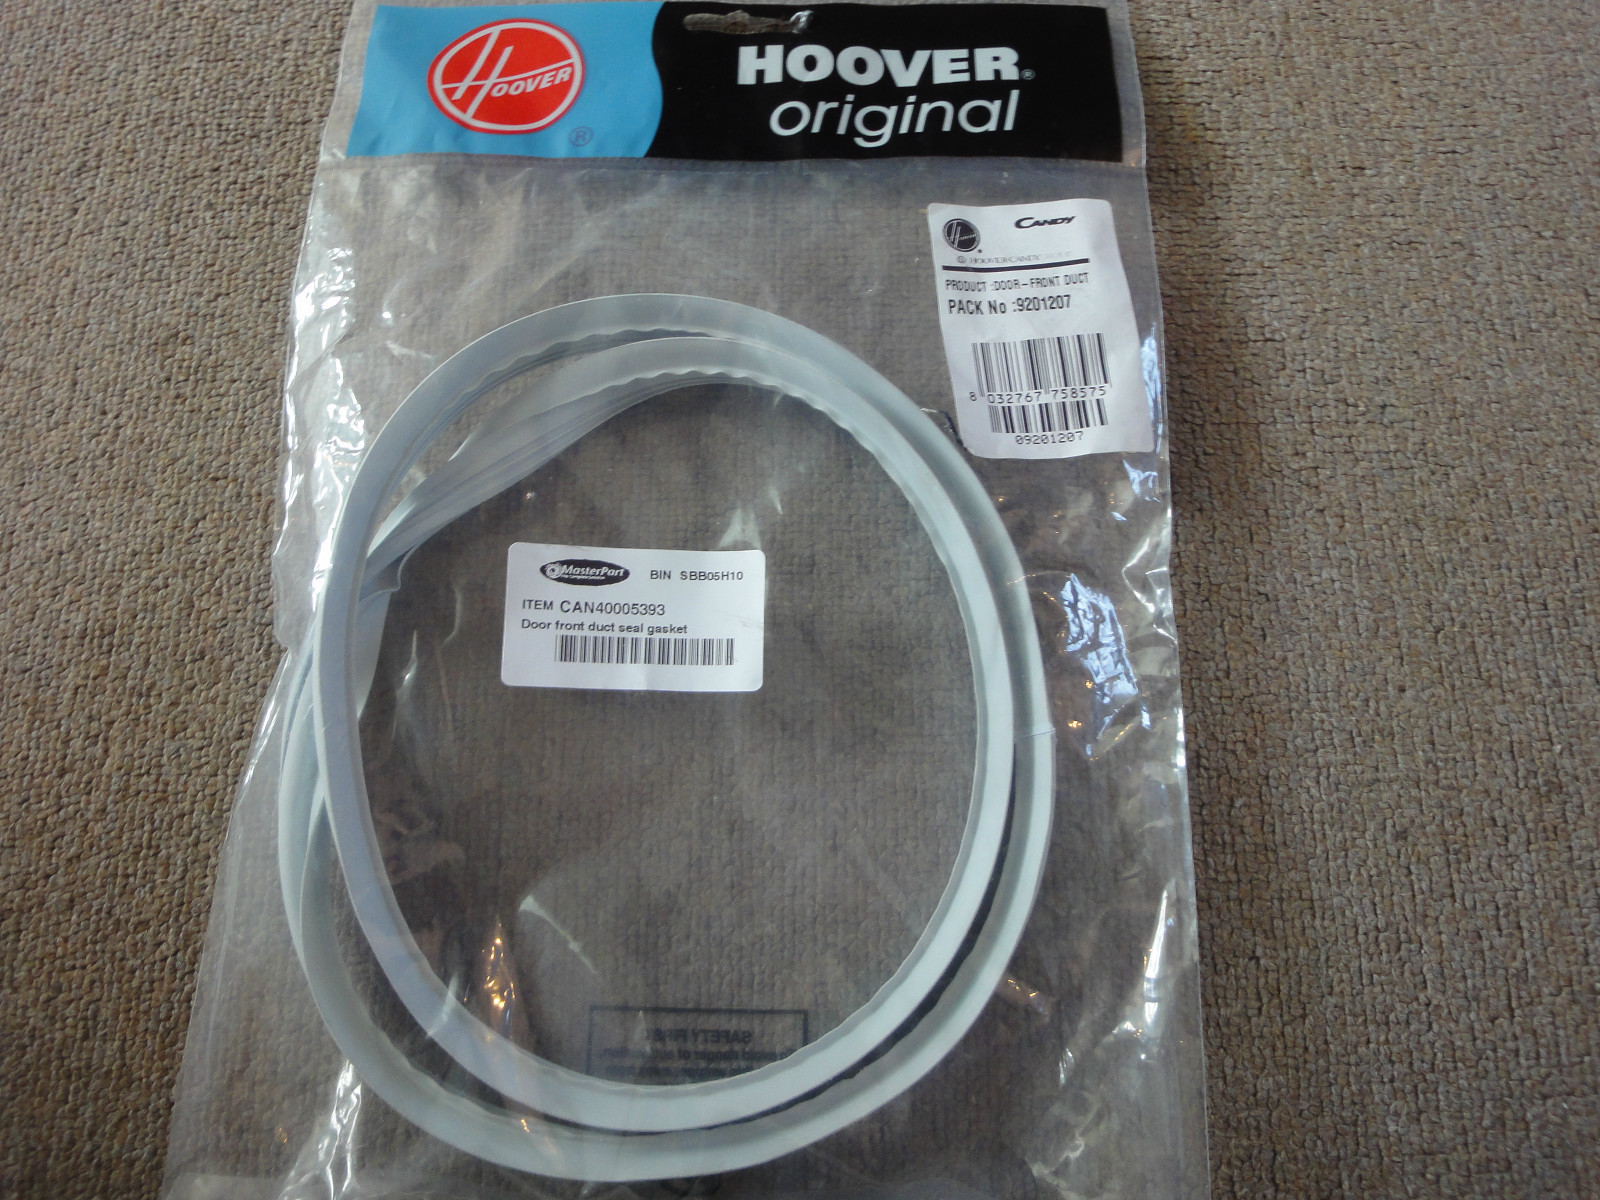 CANDY, HOOVER FRONT DUCT SEAL TUMBLE DRYER DOOR SEAL 40005393 GE